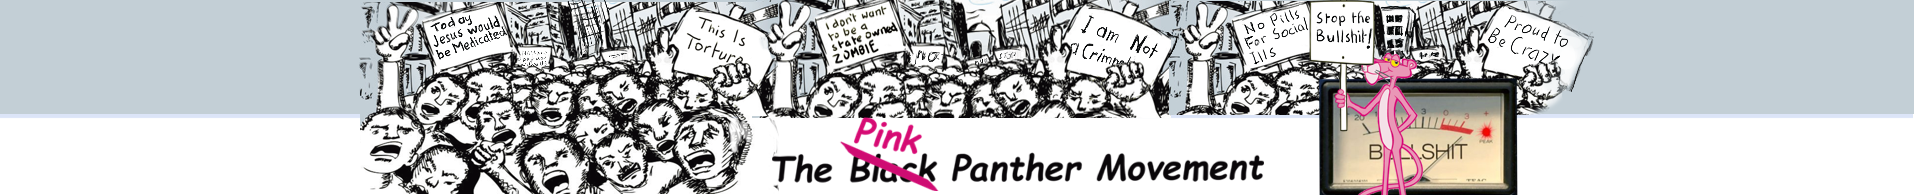 THE PINK PANTHER MOVEMENT